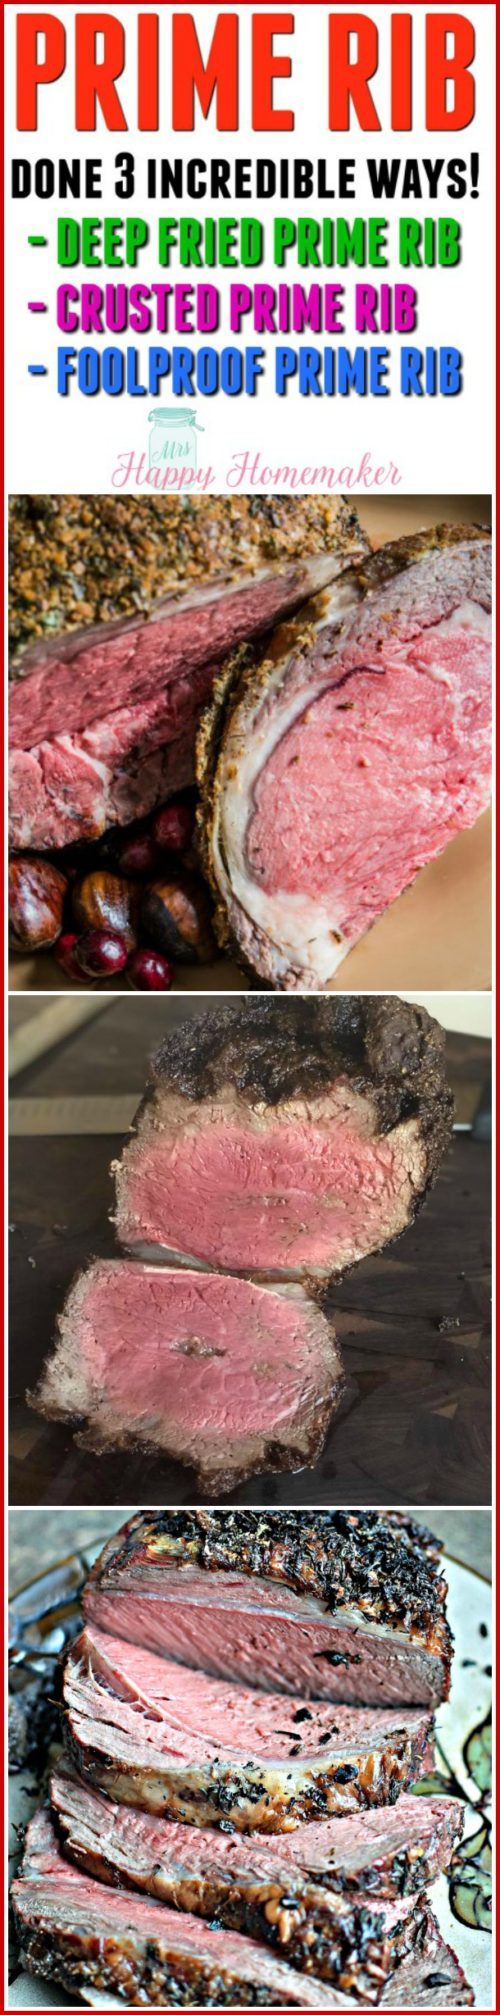 3 incredible ways to cook a prime rib - deep fried, crusted, foolproof